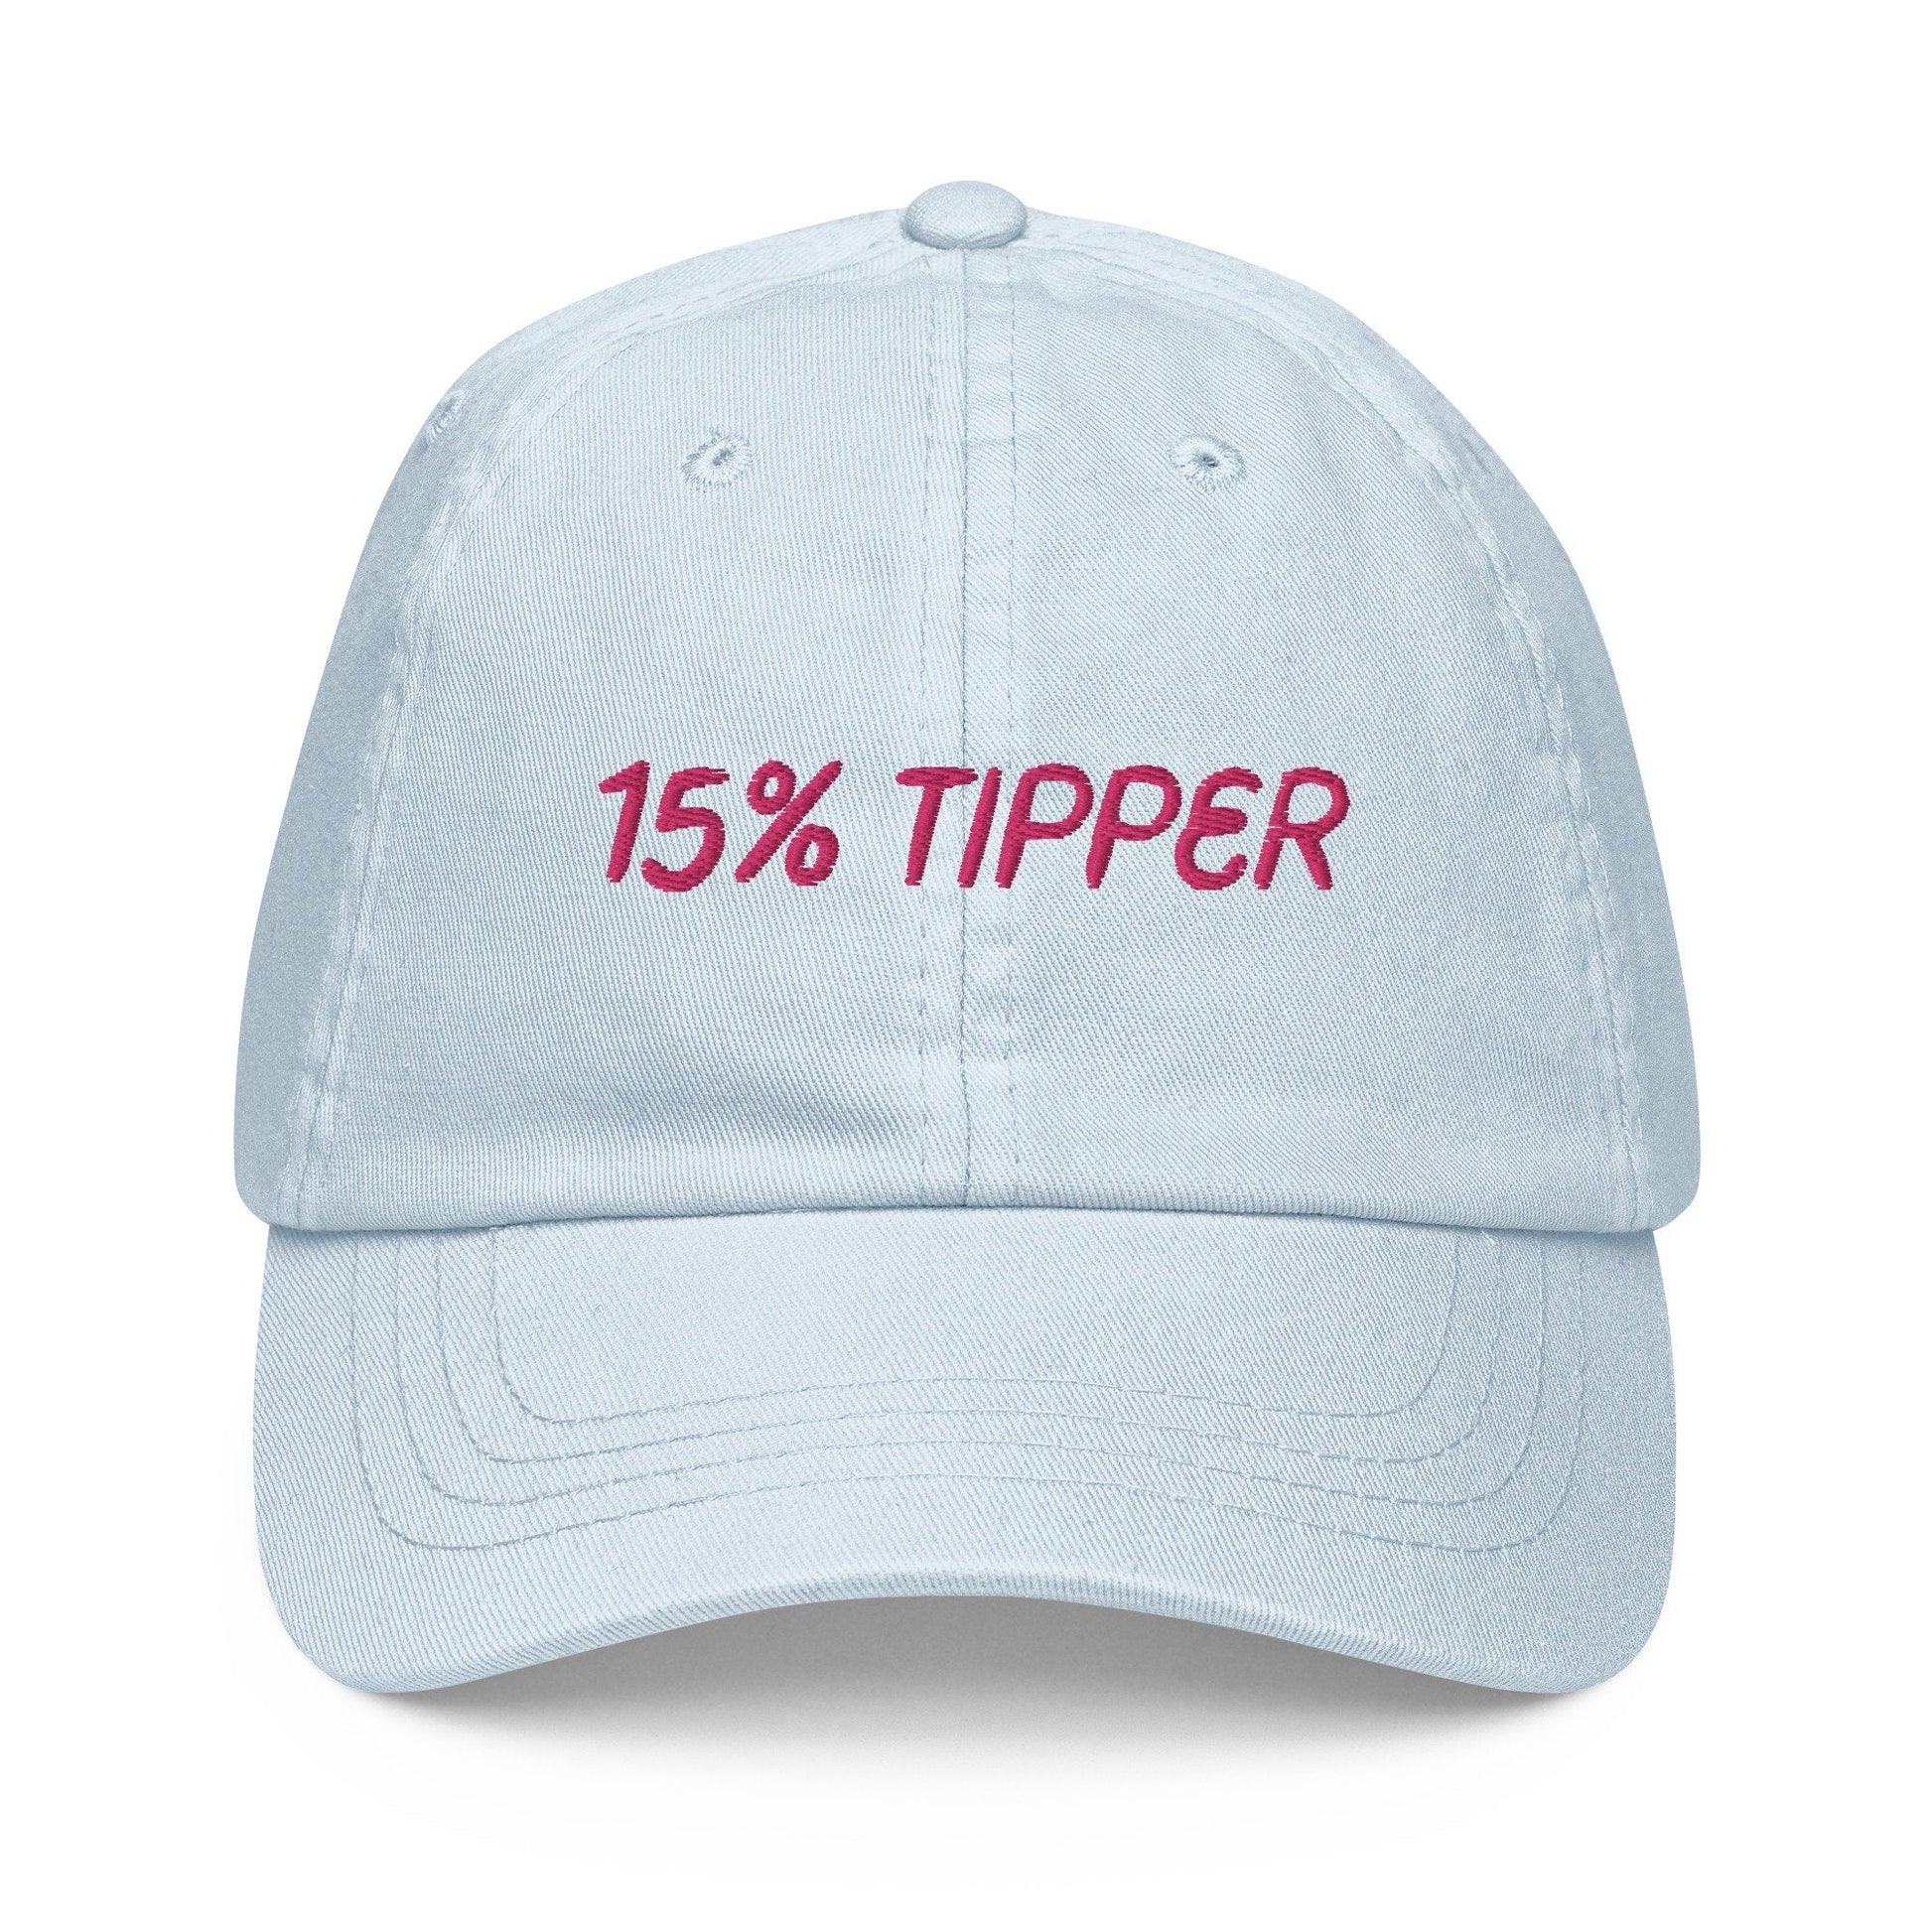 The Tipper Pastel Dad Hat - Joke Gift for food lovers - Embroidered Cotton Cap - Evilwater Originals